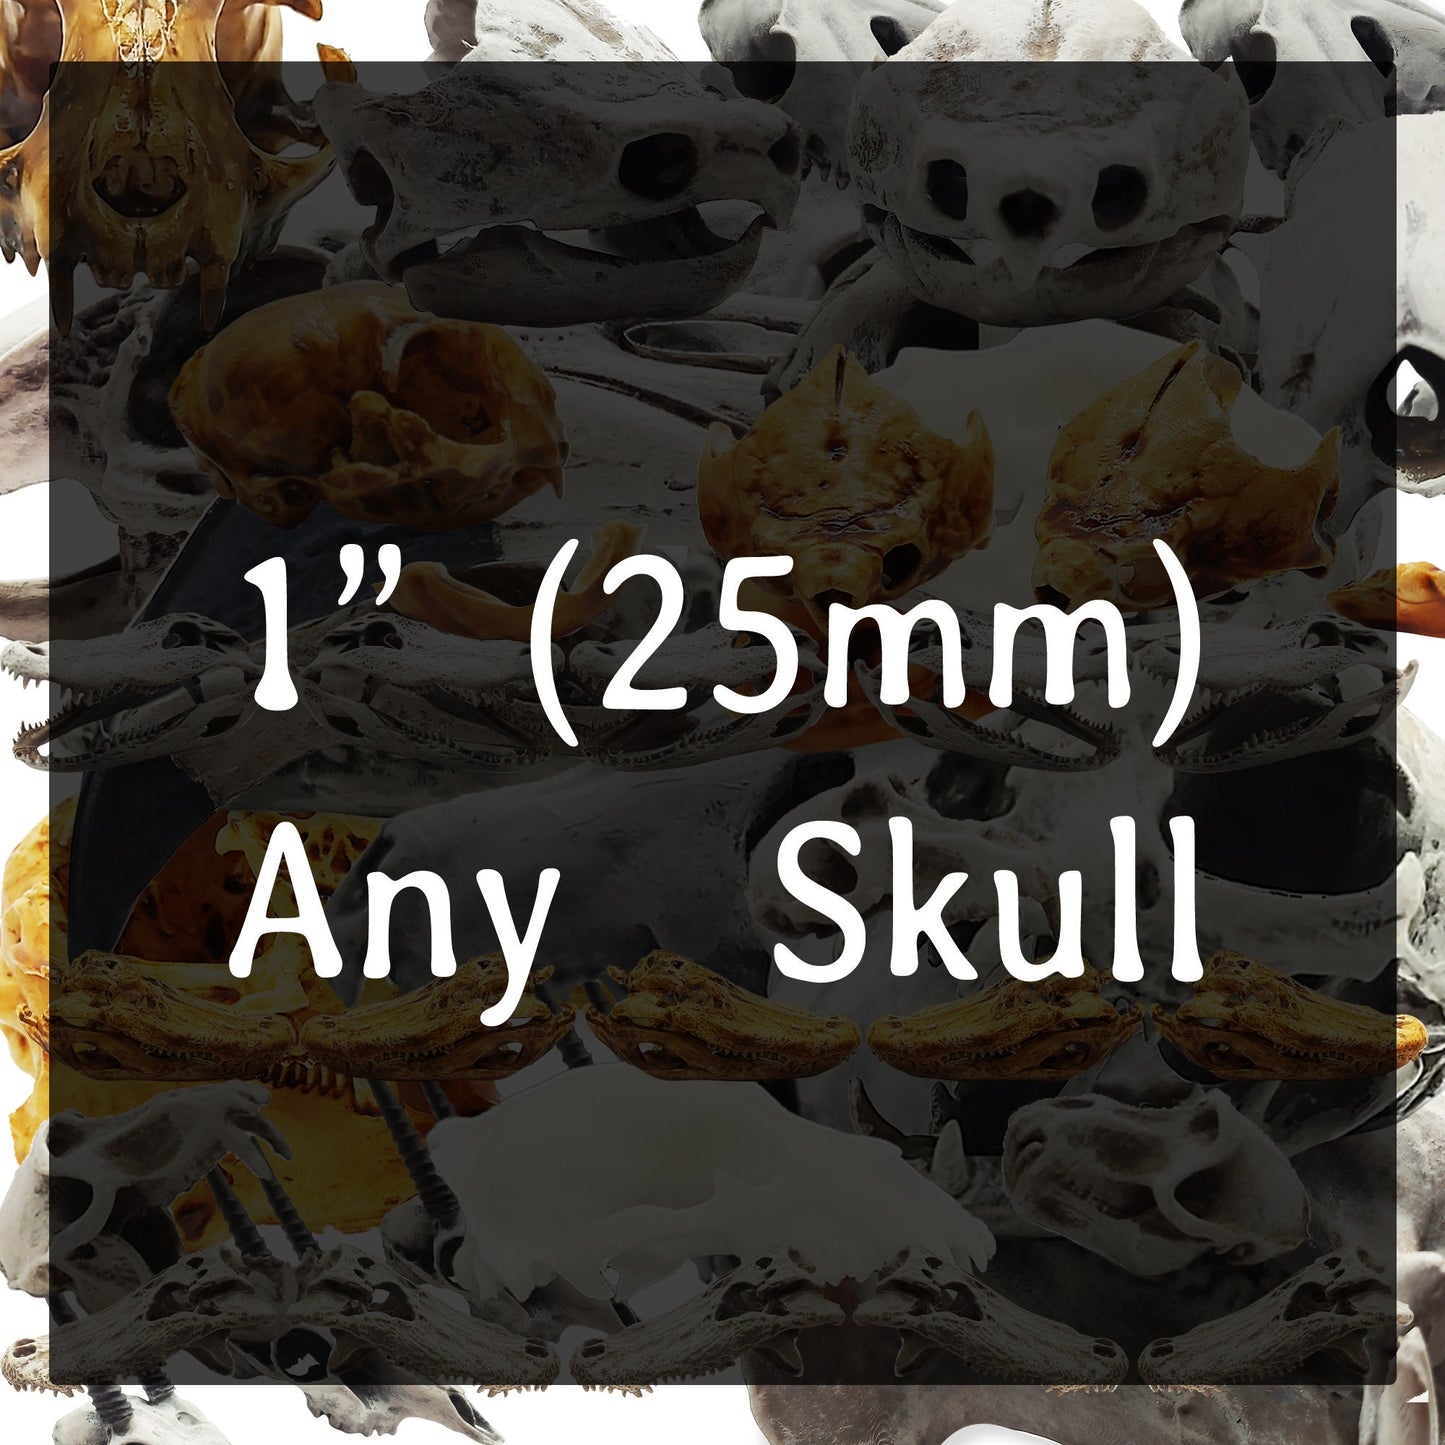 Any animal skull 1 inch in size 25mm art supply, miniature skull, unpainted 3d printed in white or gray for display or for crafts (1 skull)